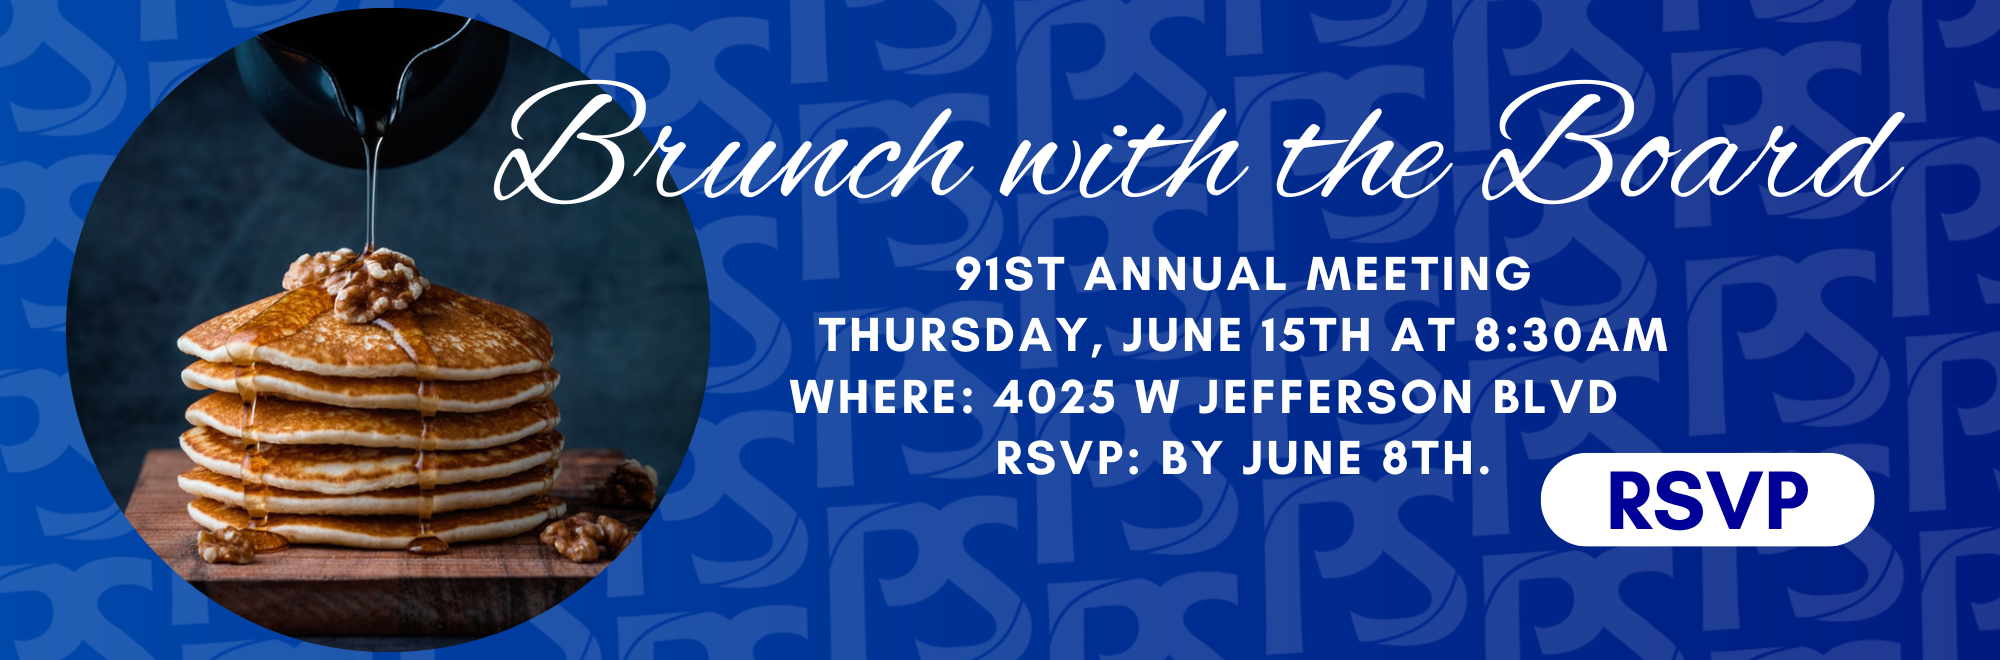 Brunch with the Board. 91st Annual Meeting. Thursady, June 15th at 8:30am. Where: 4025 W Jefferson Blvd. RSVP by June 8th. Click to RSVP